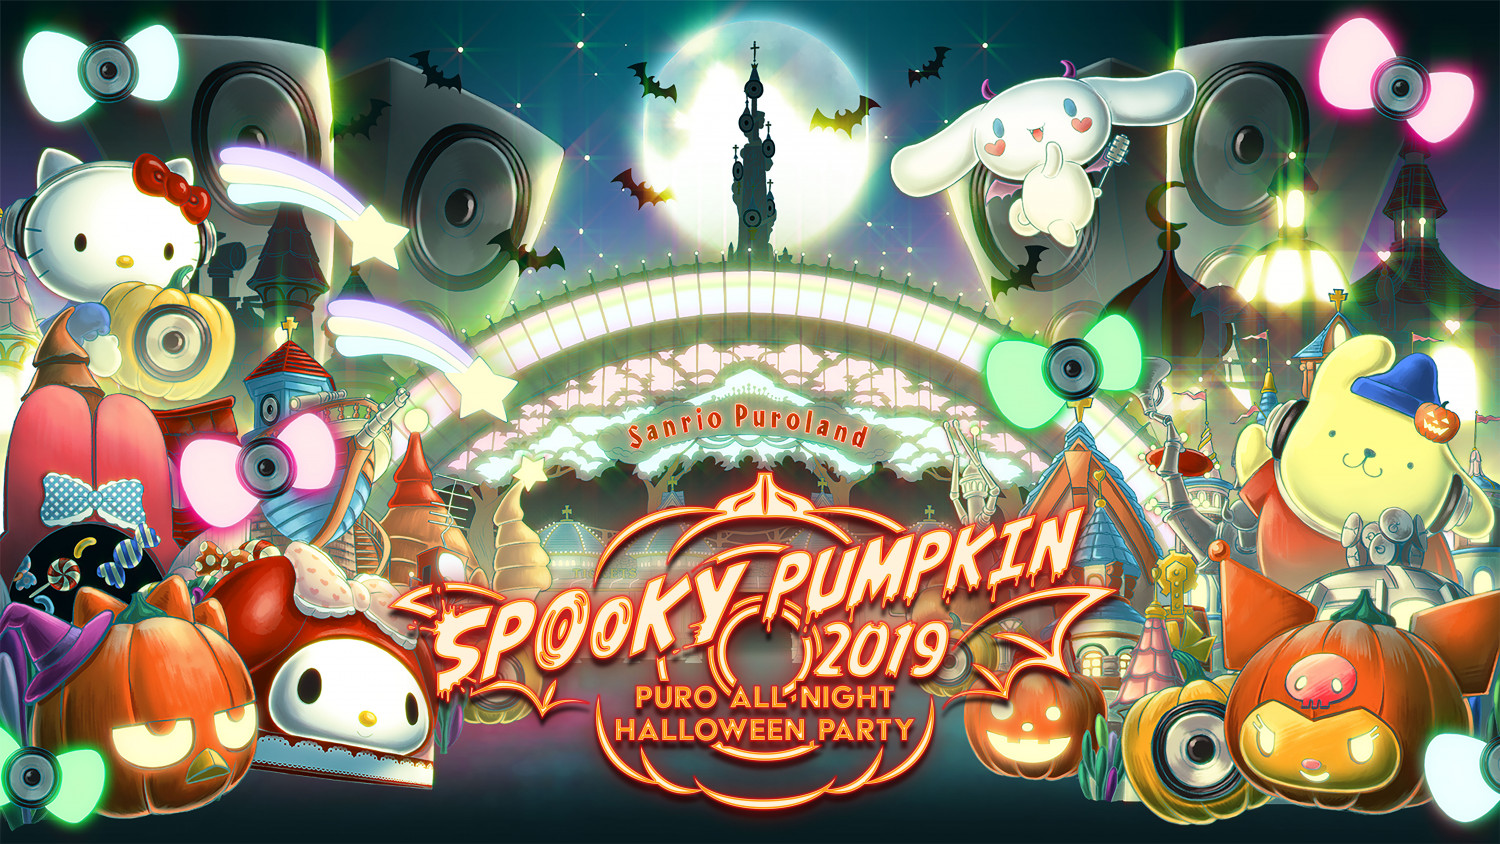 All-Night Halloween Party “SPOOKY PUMPKIN 2019” will be Held in Sanrio Puroland on October 26th !